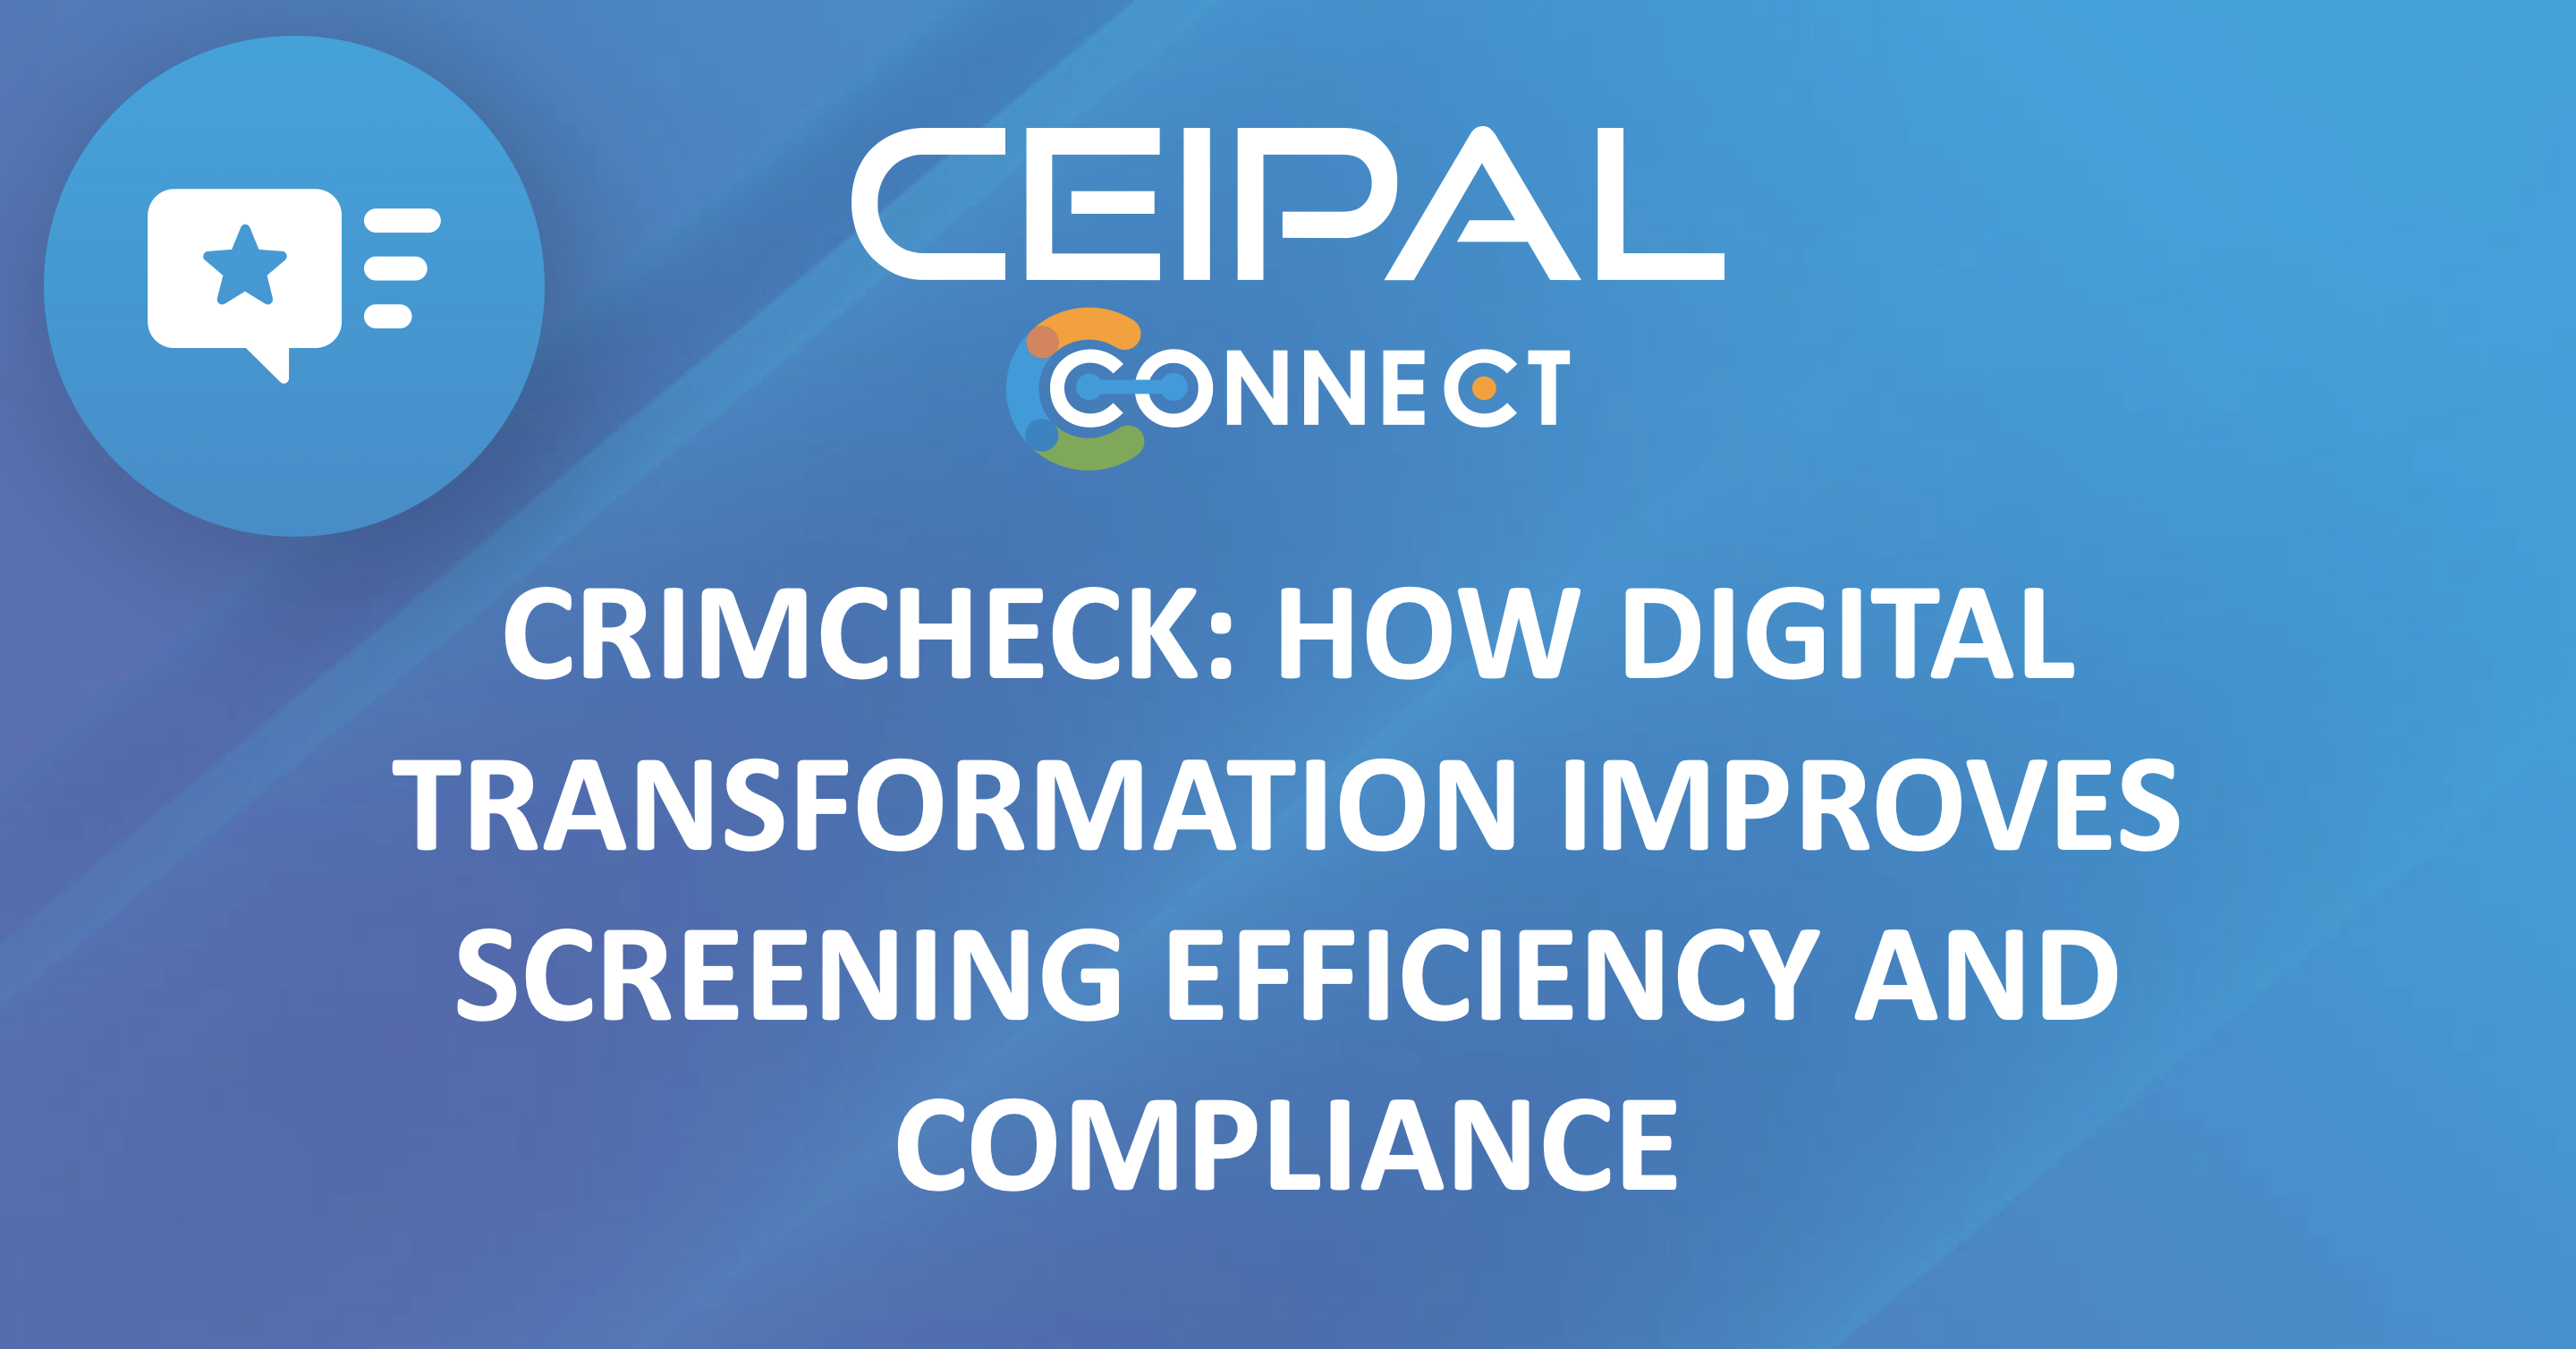 Crimcheck: How Digital Transformation Improves Screening Efficiency and Compliance